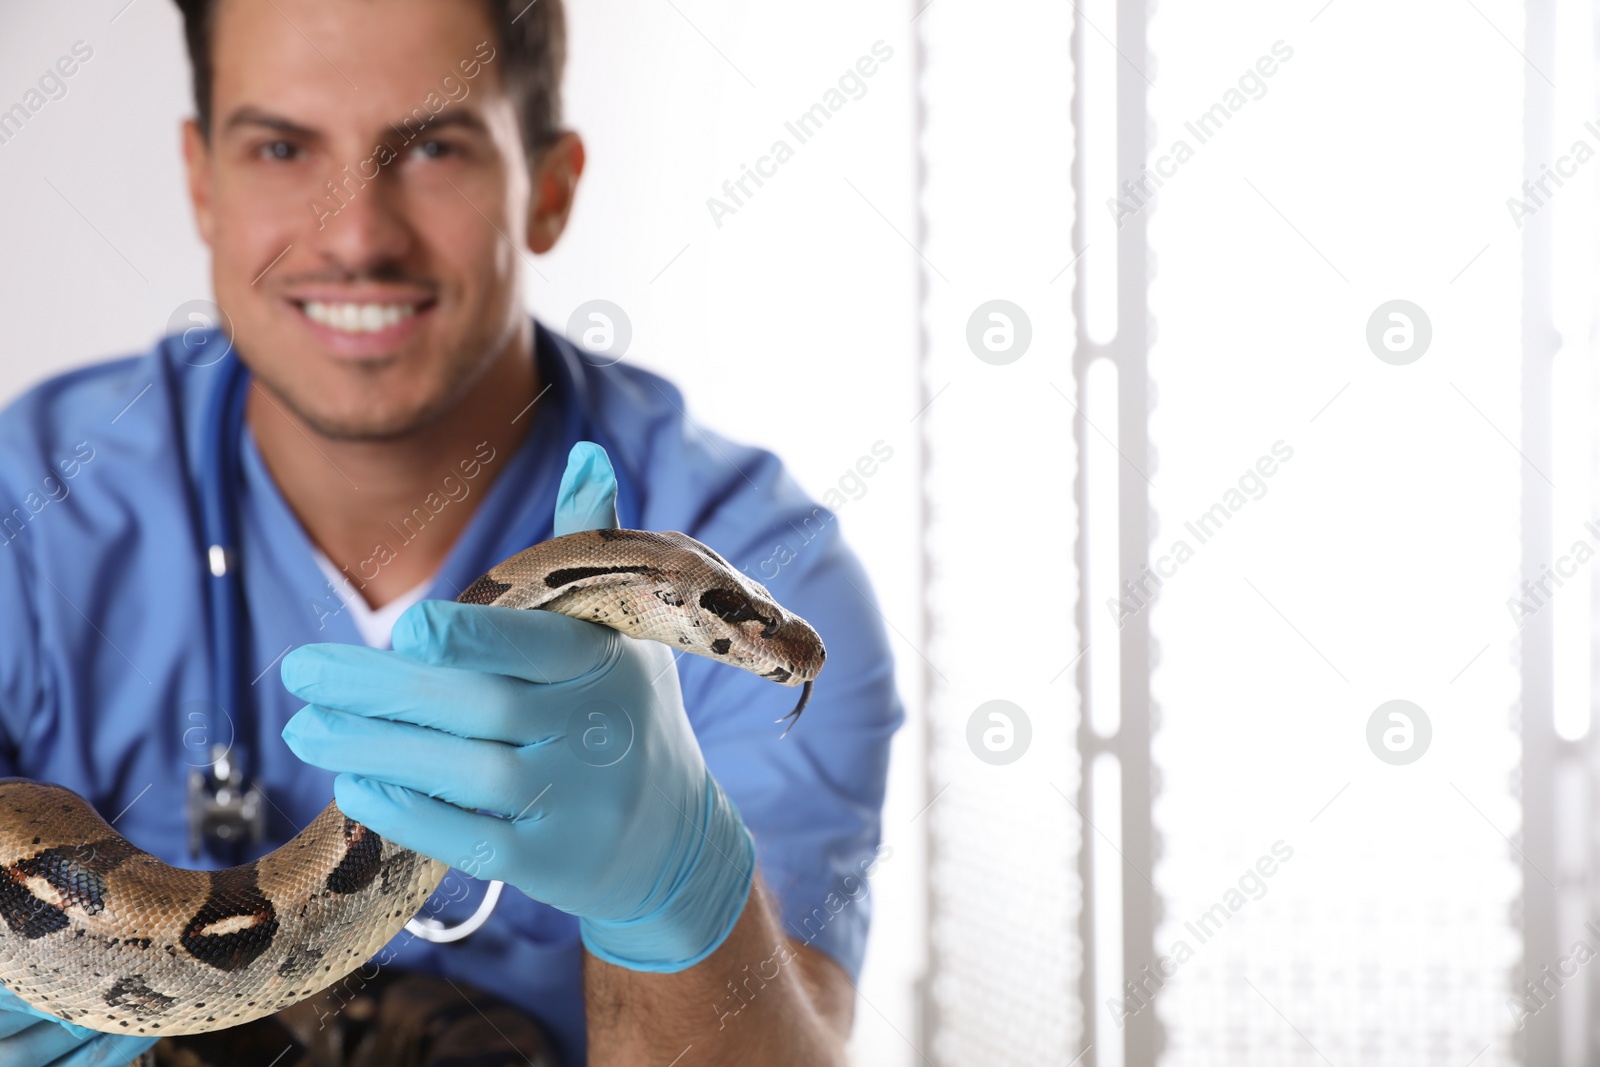 Photo of Male veterinarian examining boa constrictor in clinic, focus on hand